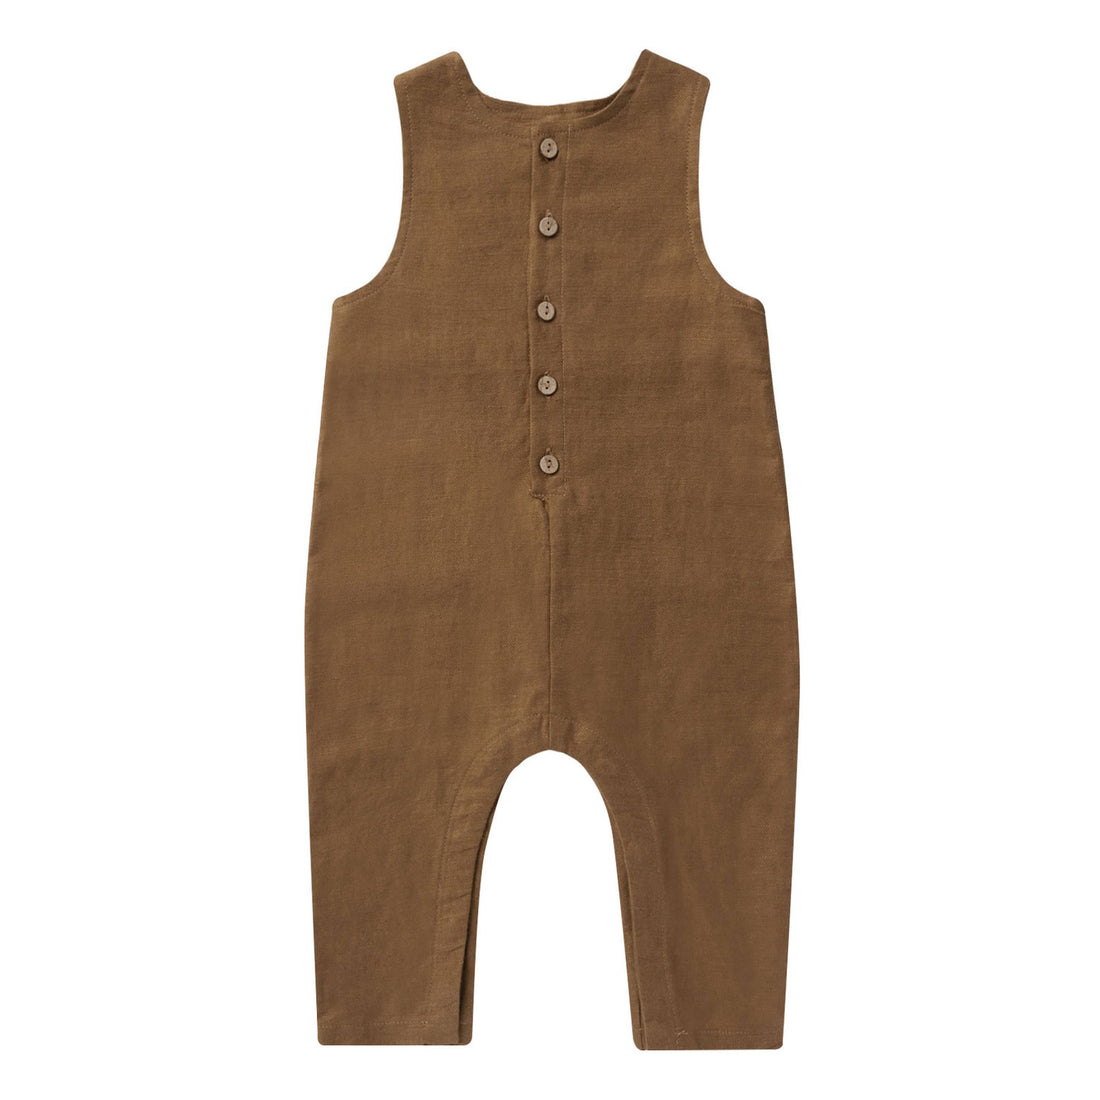 Rylee and Cru Saddle Button Jumpsuit